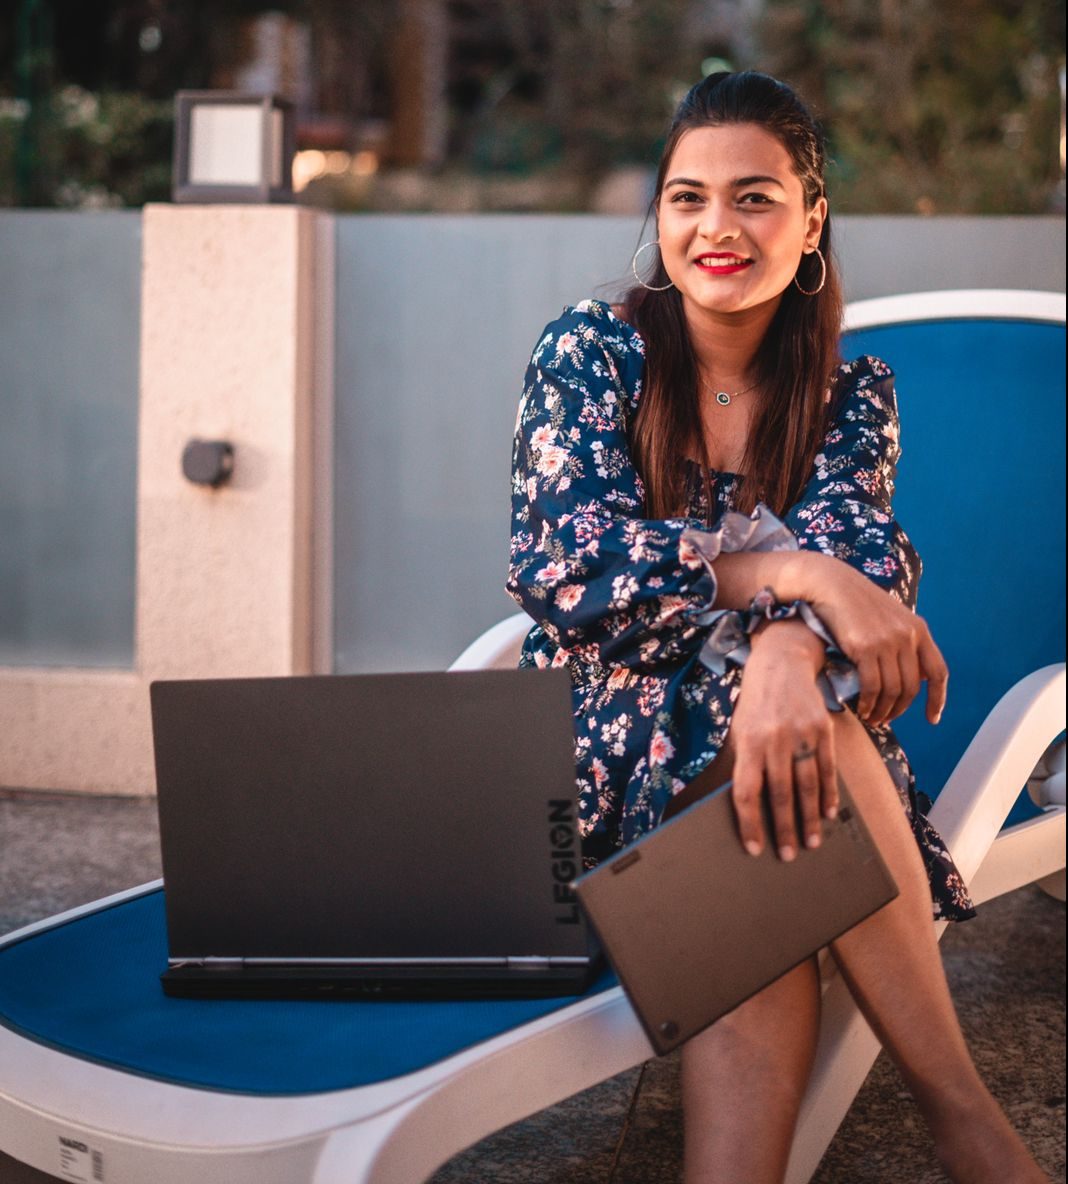 Vishakha Fulsunge in a dress sitting next to a Lenovo laptop and holding a tablet